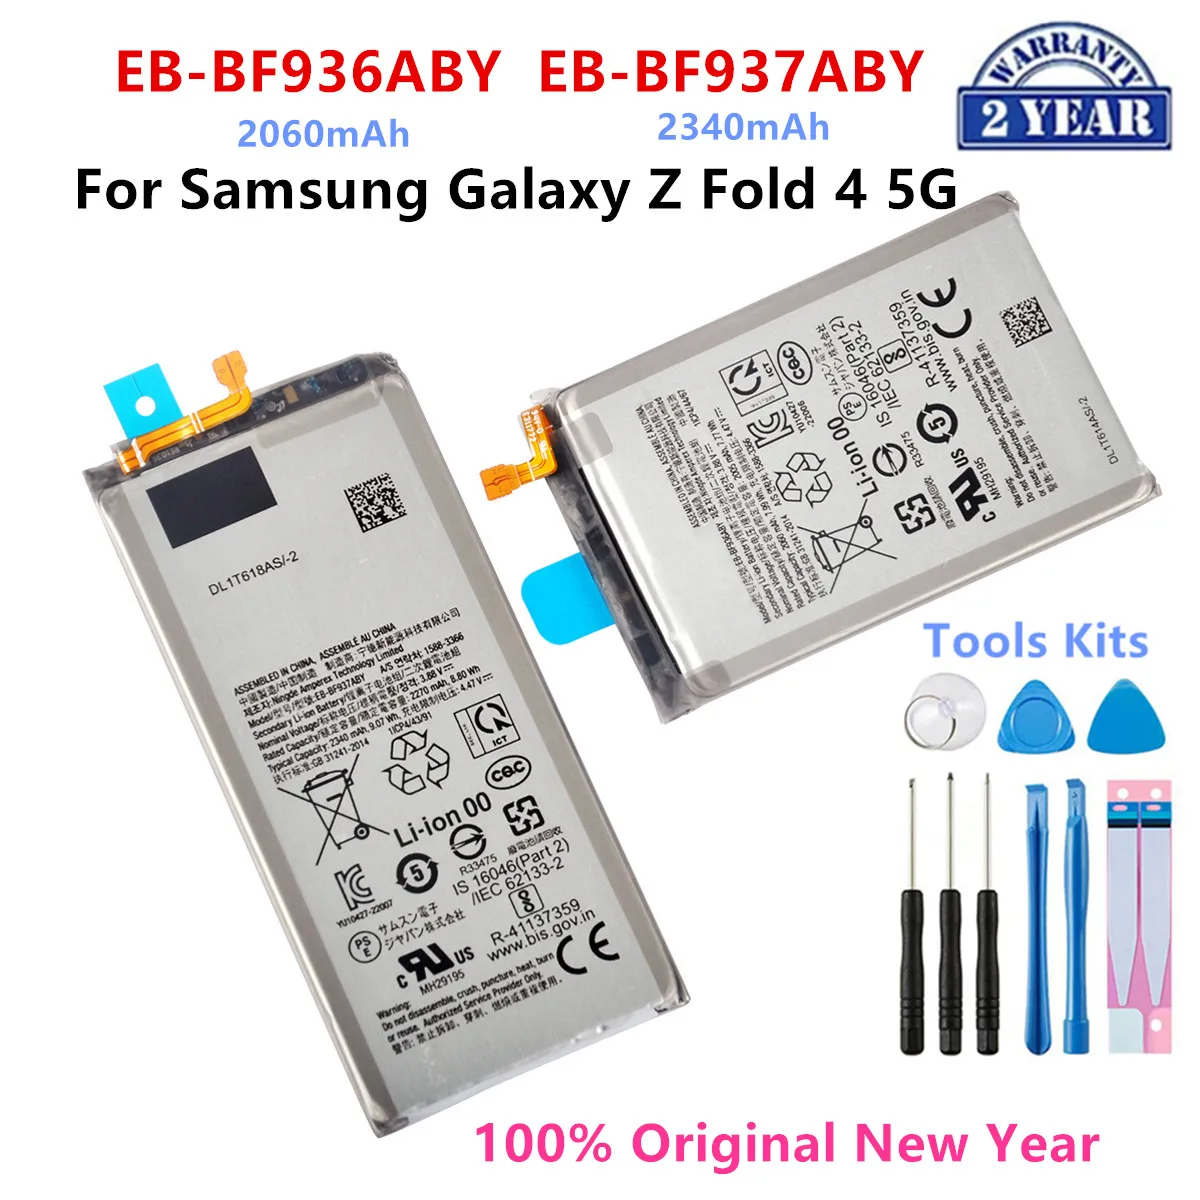 

100% Orginal EB-BF936ABY EB-BF937ABY Battery For Samsung Galaxy Z Fold 4 5G F936 F937 + Replacement Batteries+Tools